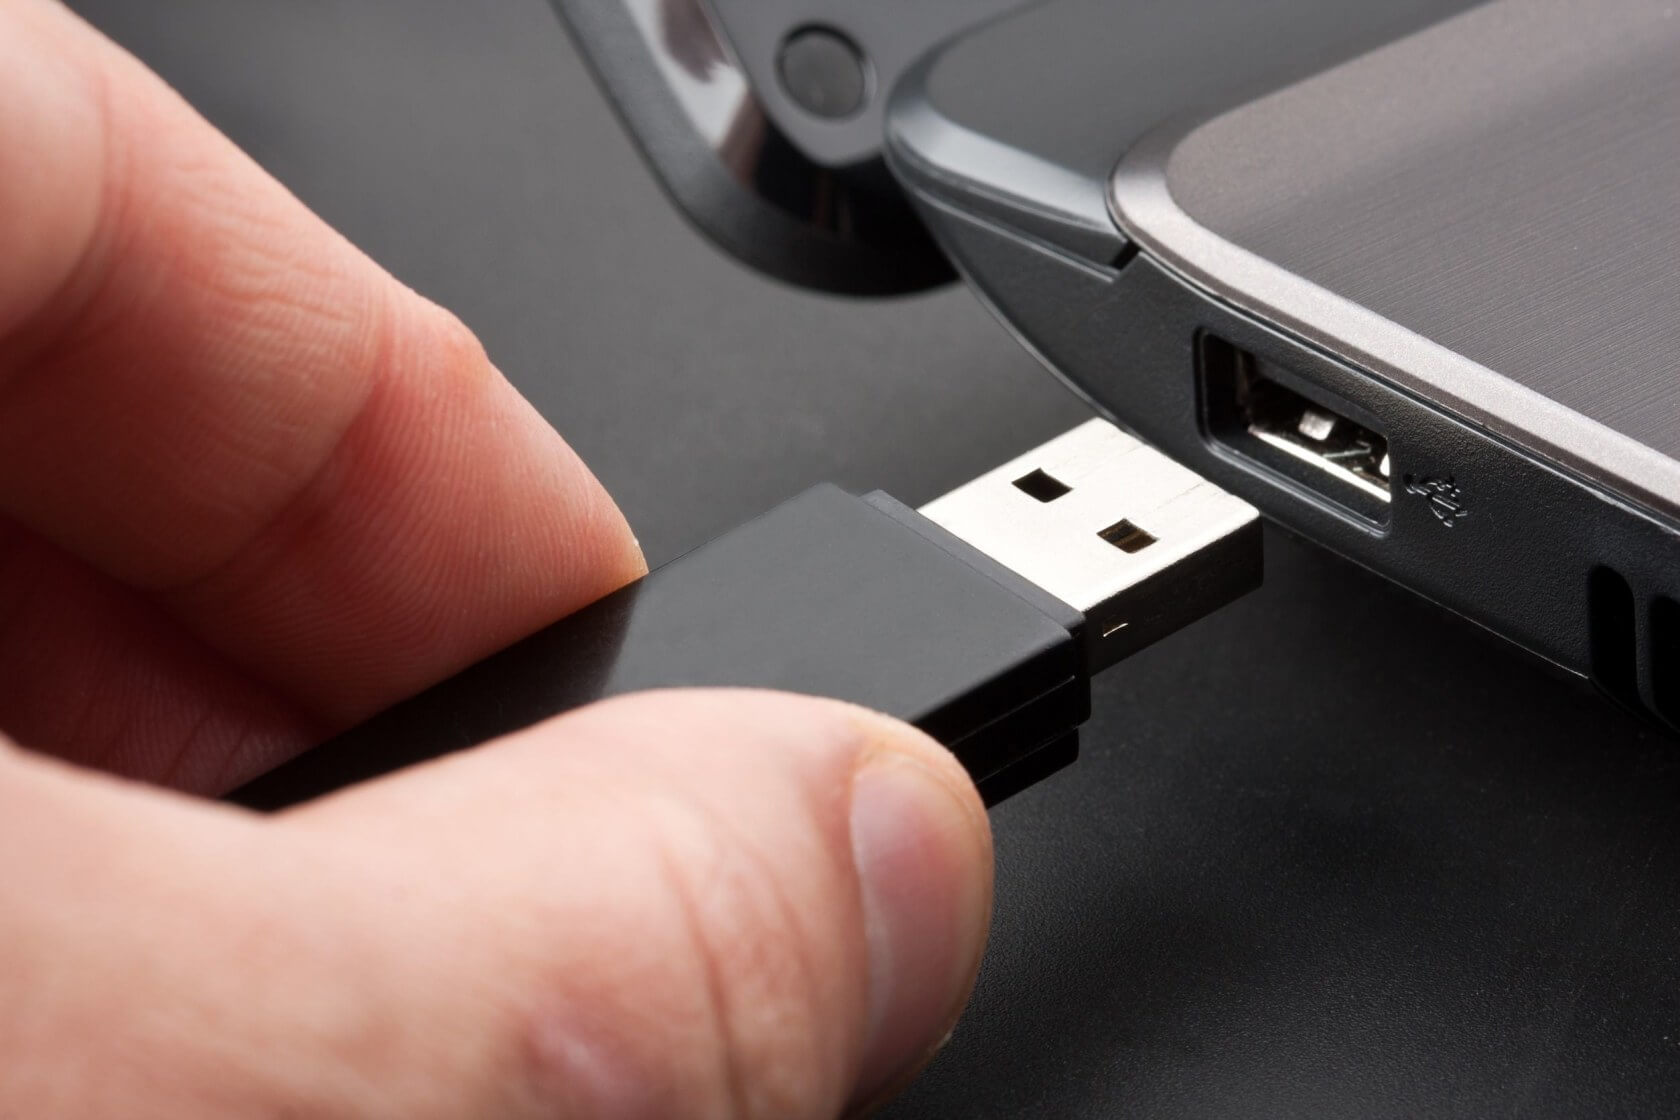 Original USB inventor says a reversible connector would have been too expensive to produce